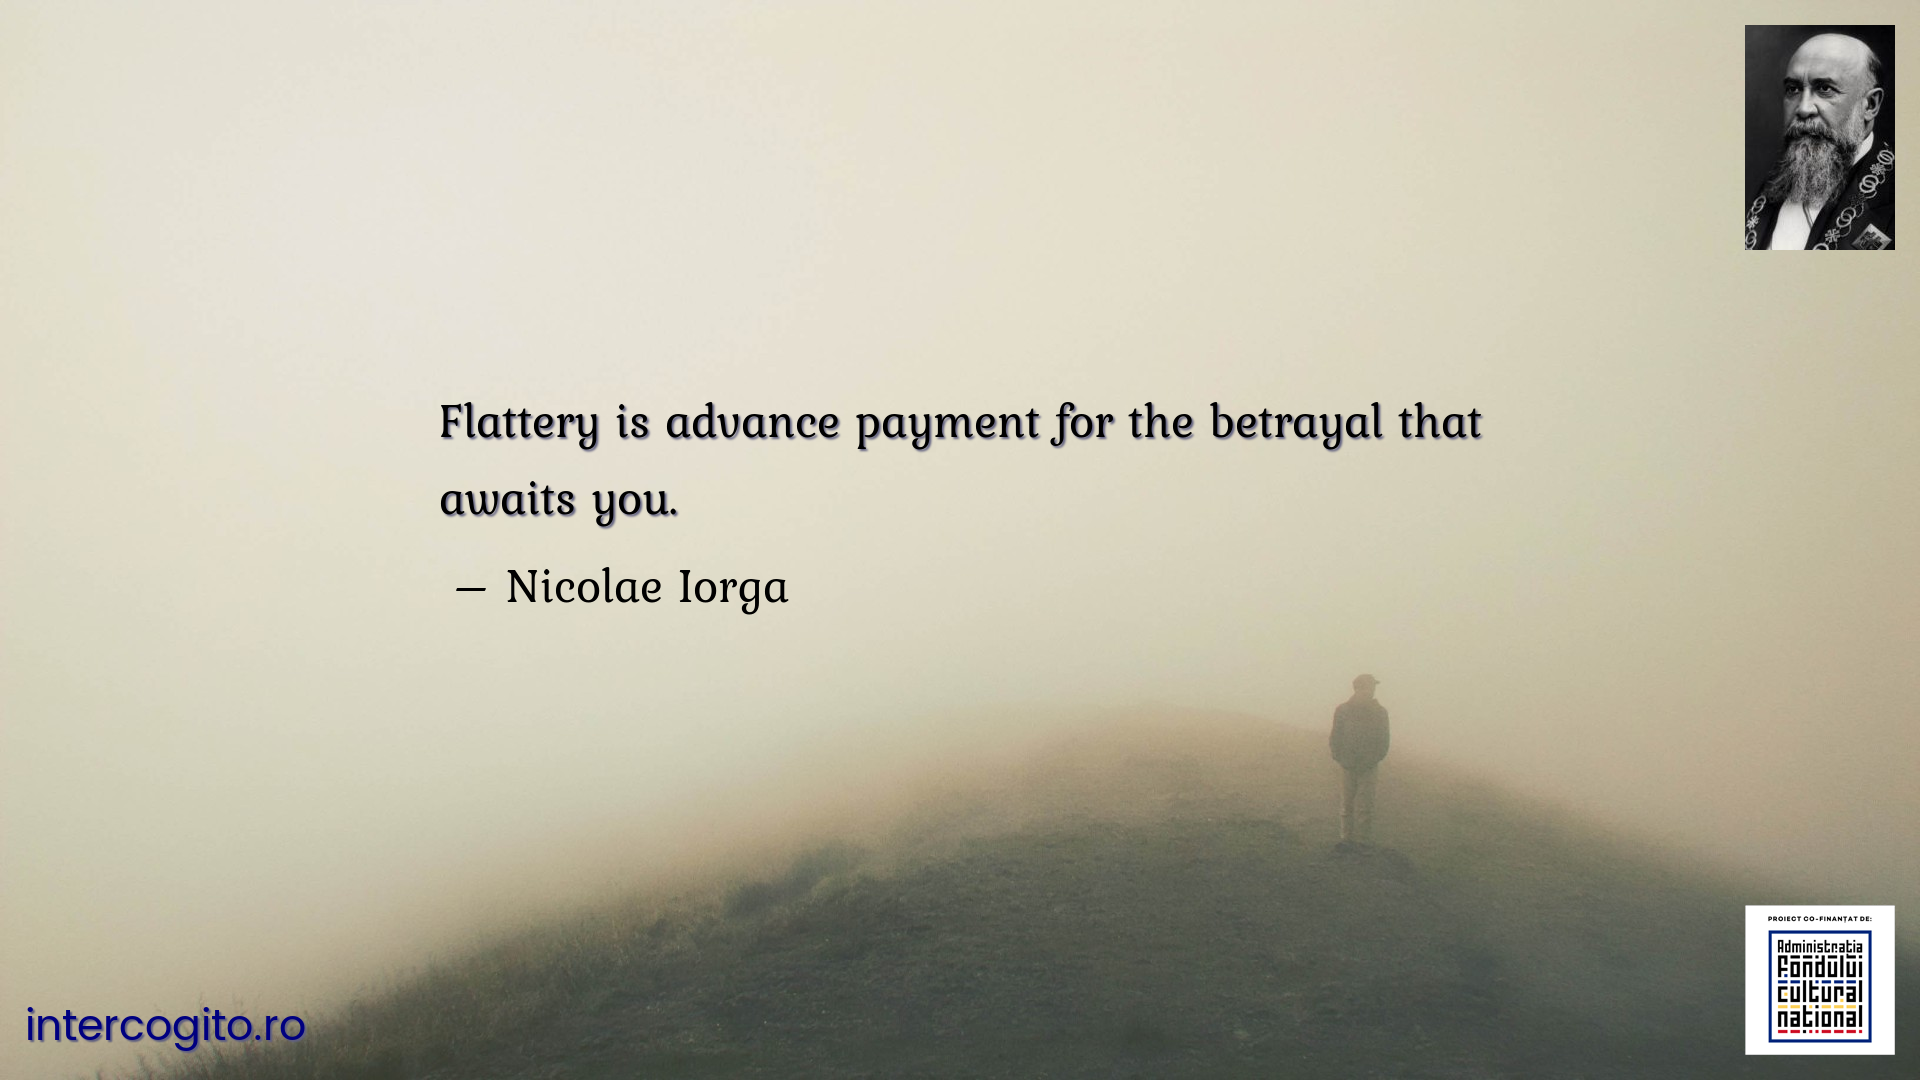 Flattery is advance payment for the betrayal that awaits you.